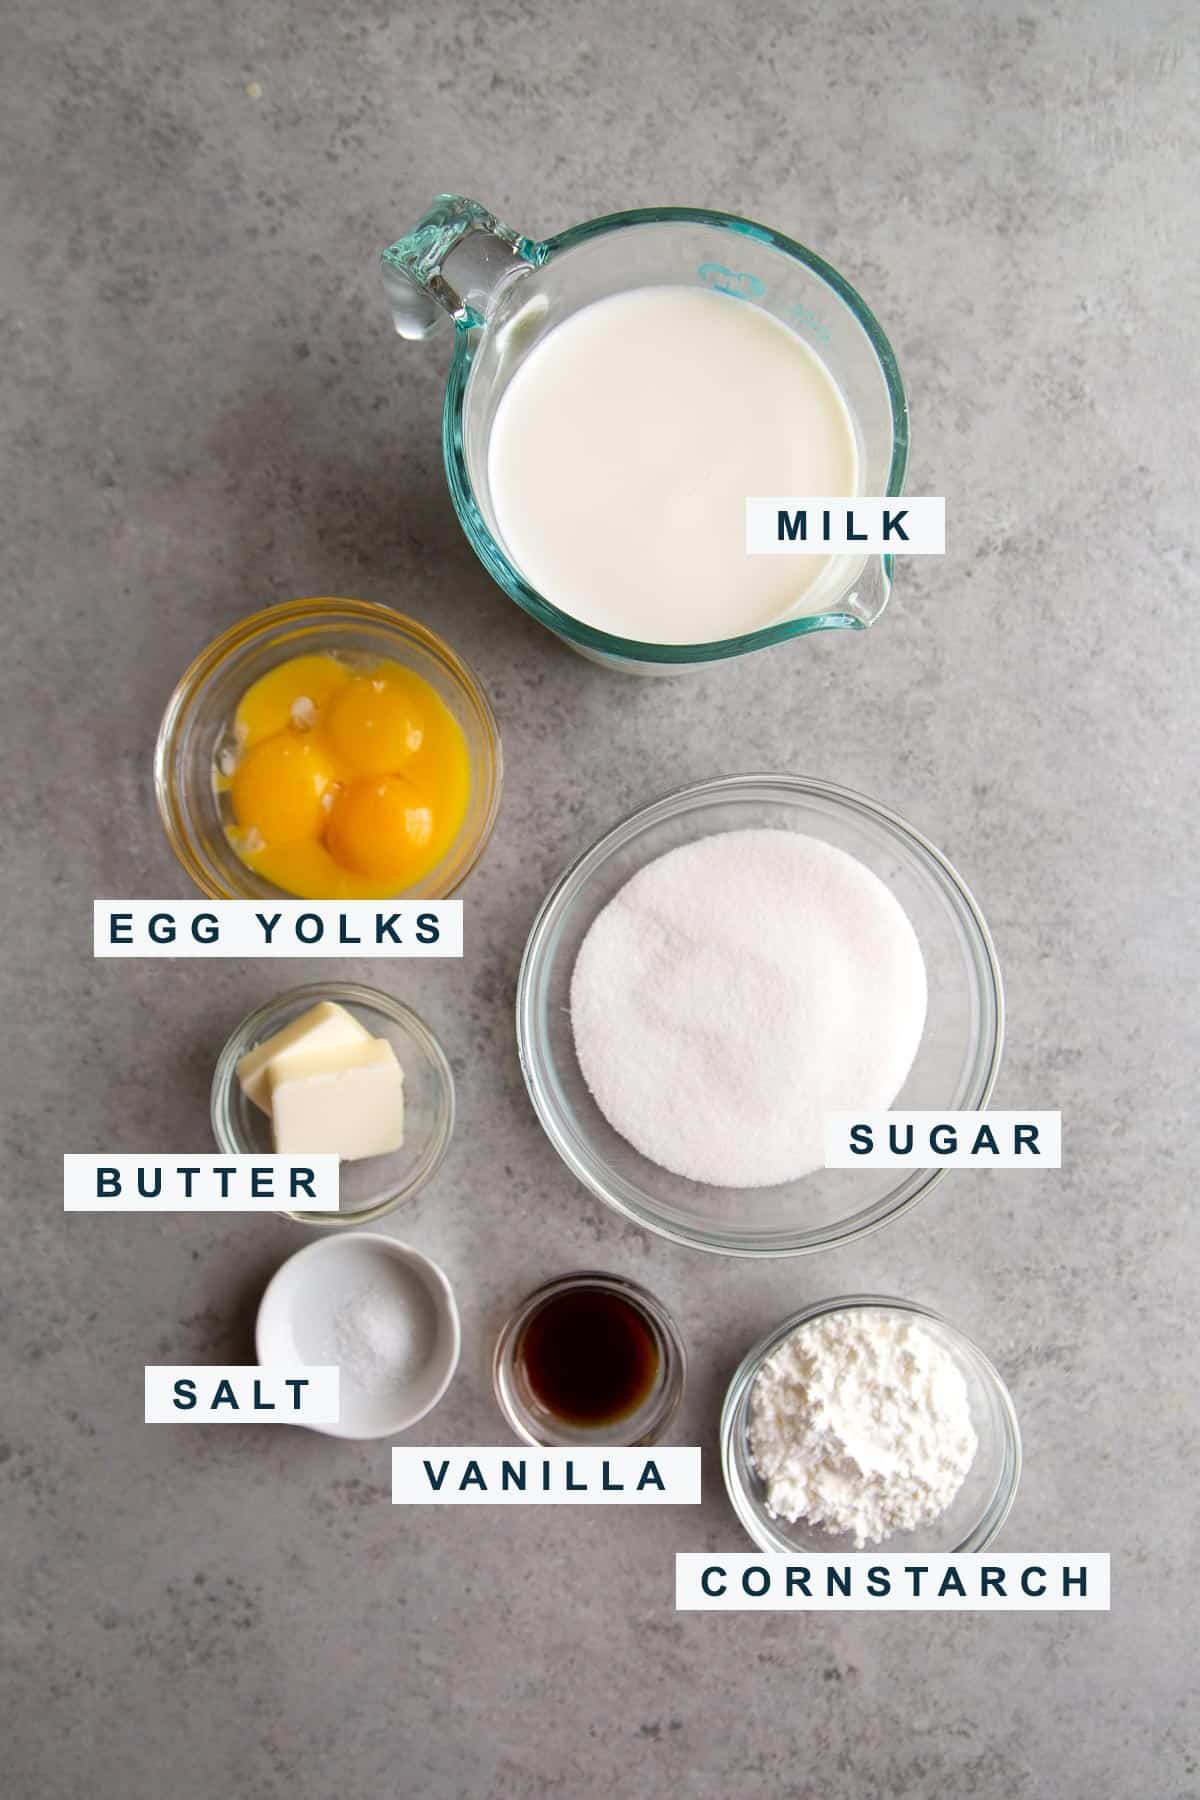 portioned out ingredients needed to make pastry cream include milk, egg yolks, cornstarch, and sugar.